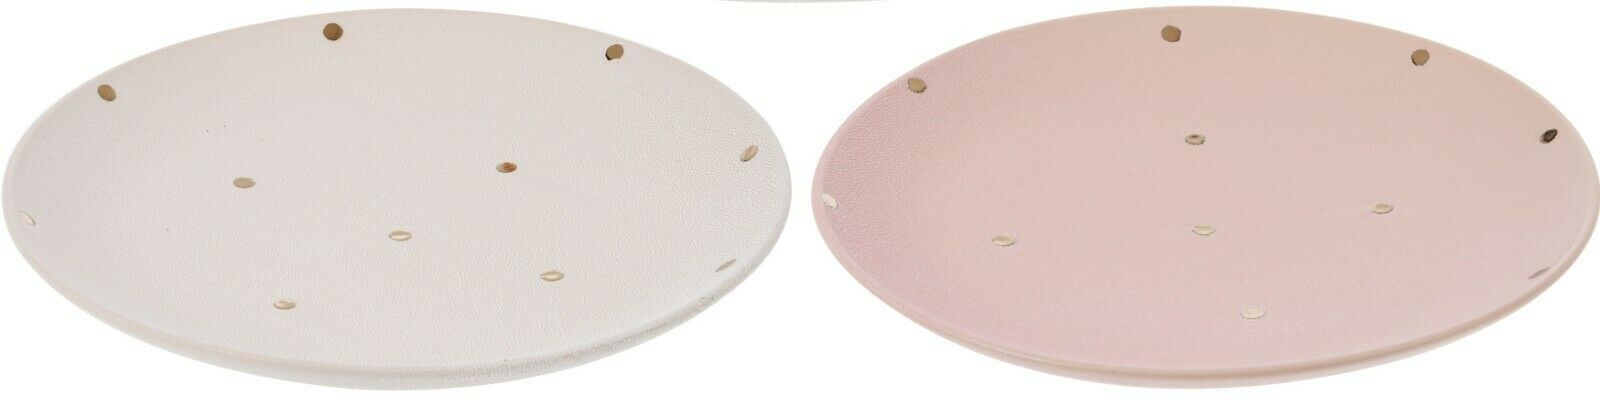 21cm Dinner Plate Stoneware Plate With Gold Dots White & Pink